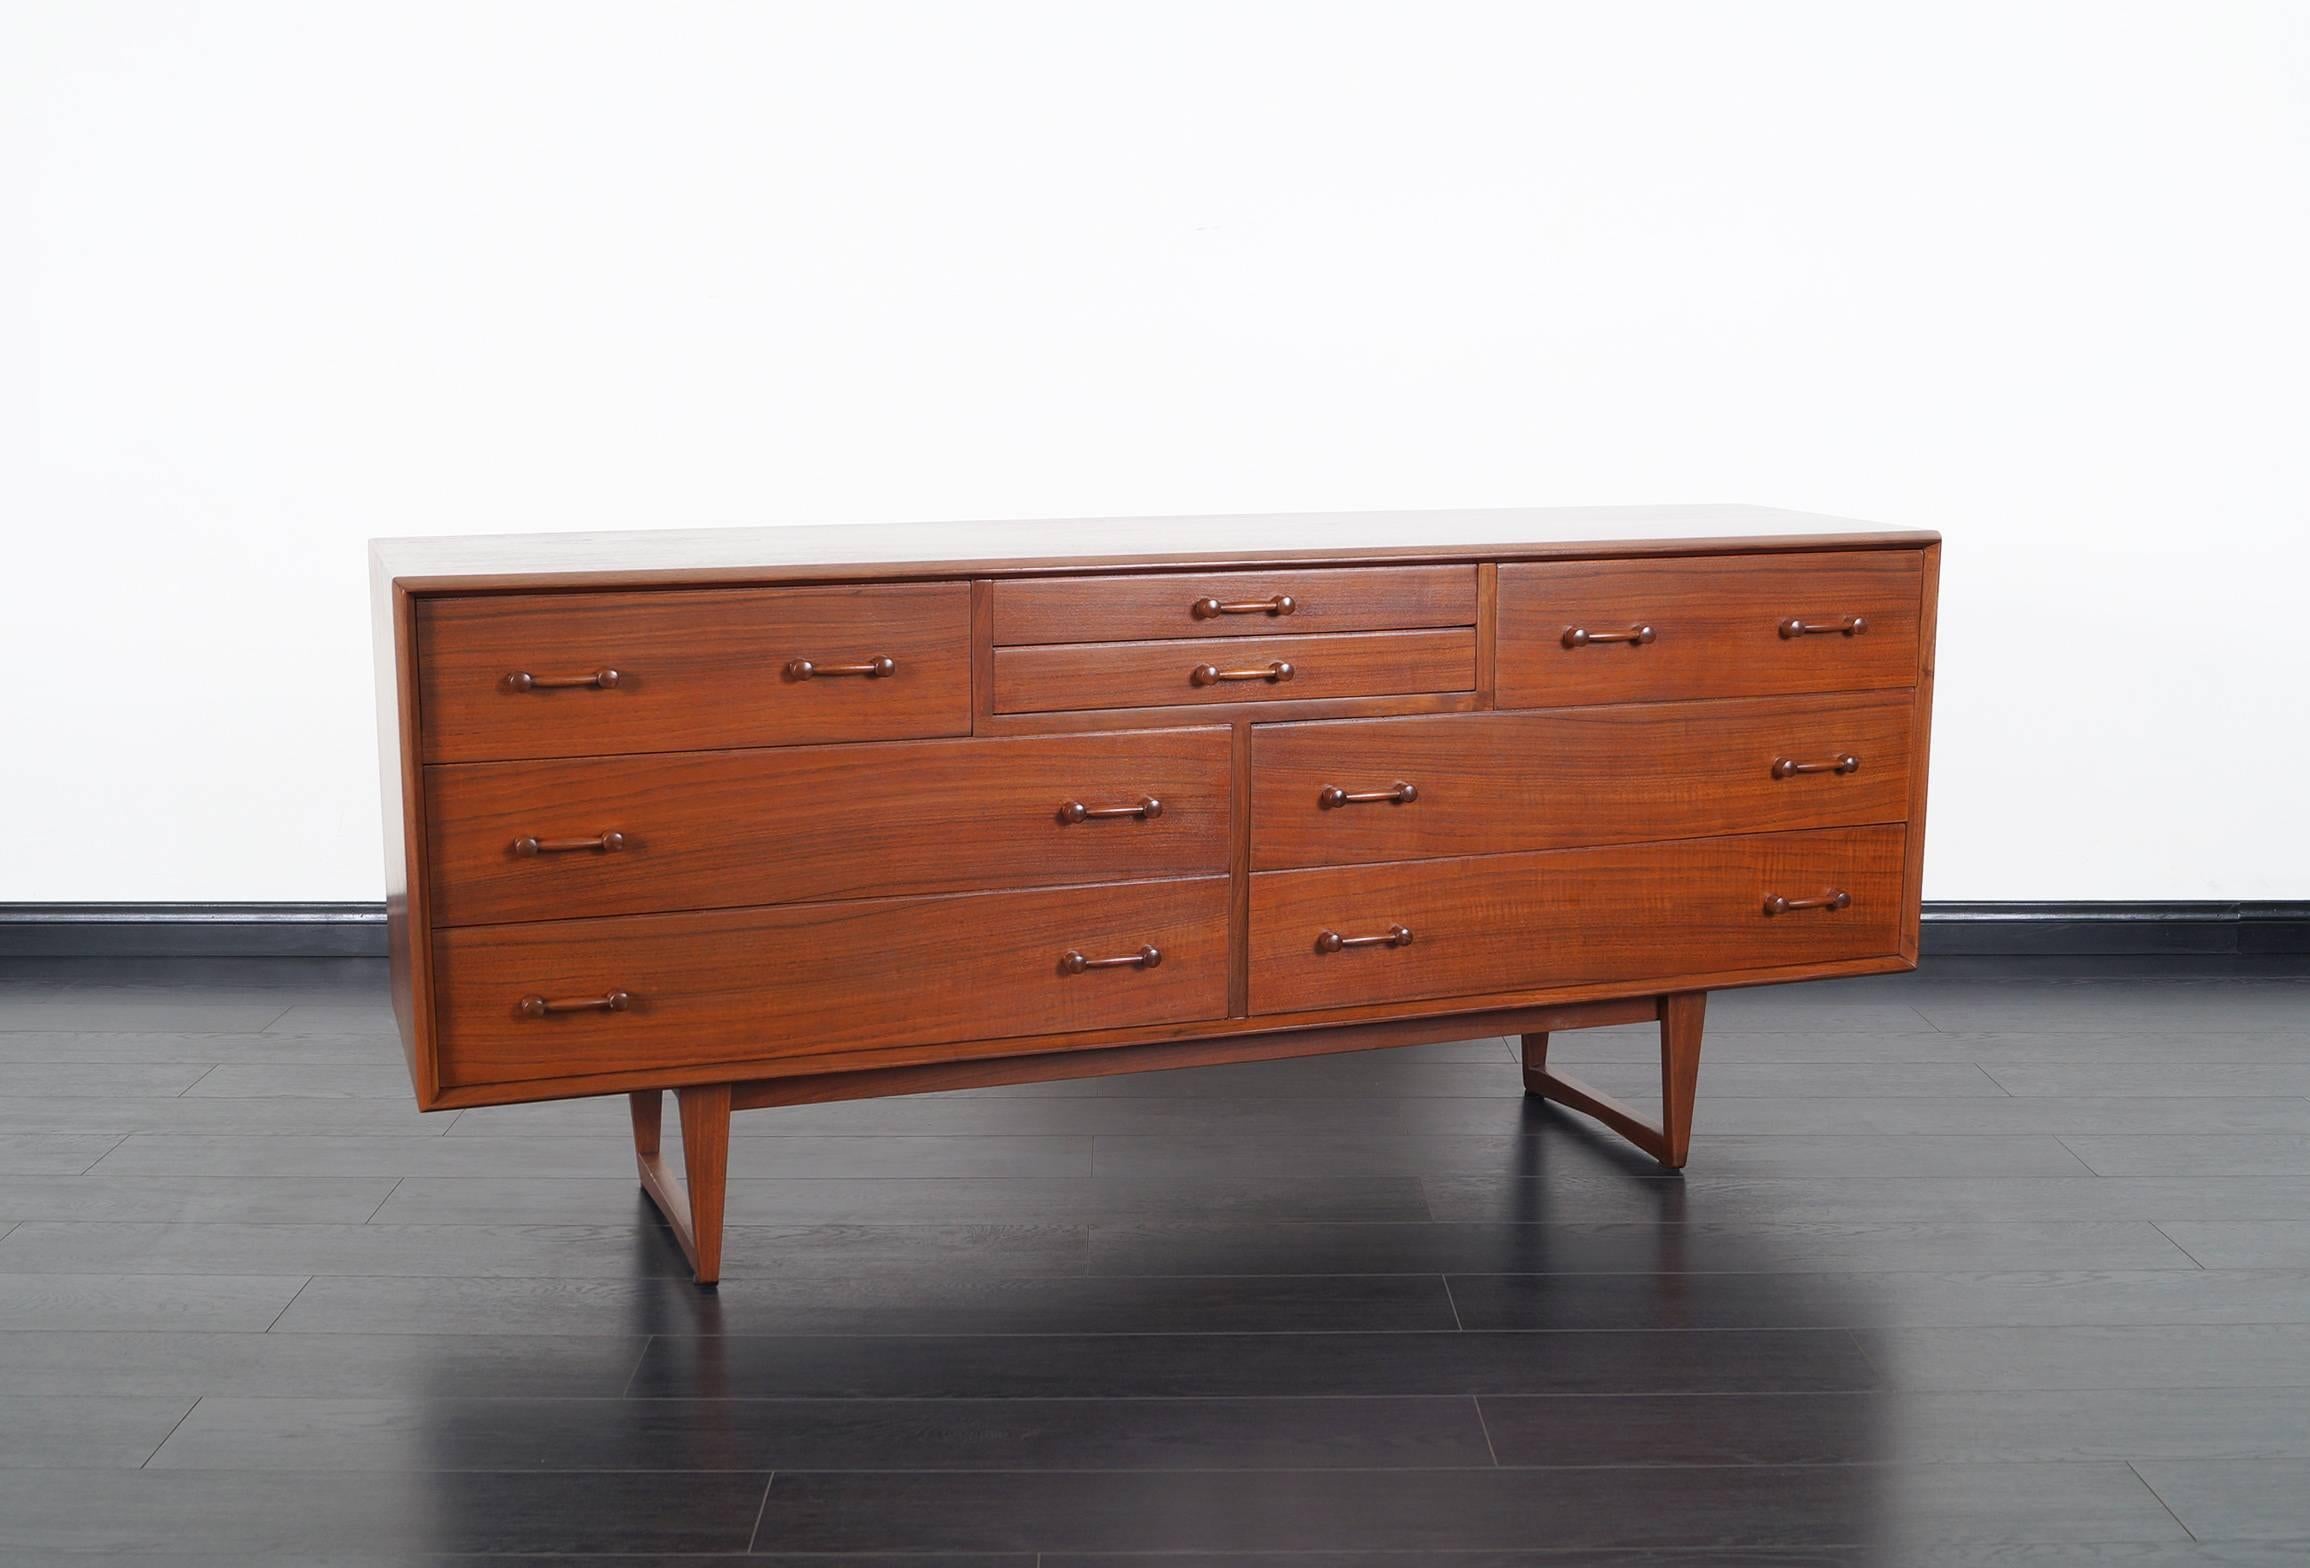 Danish modern walnut dresser. Features eight dovetail drawers with sculpted handles and legs.
  